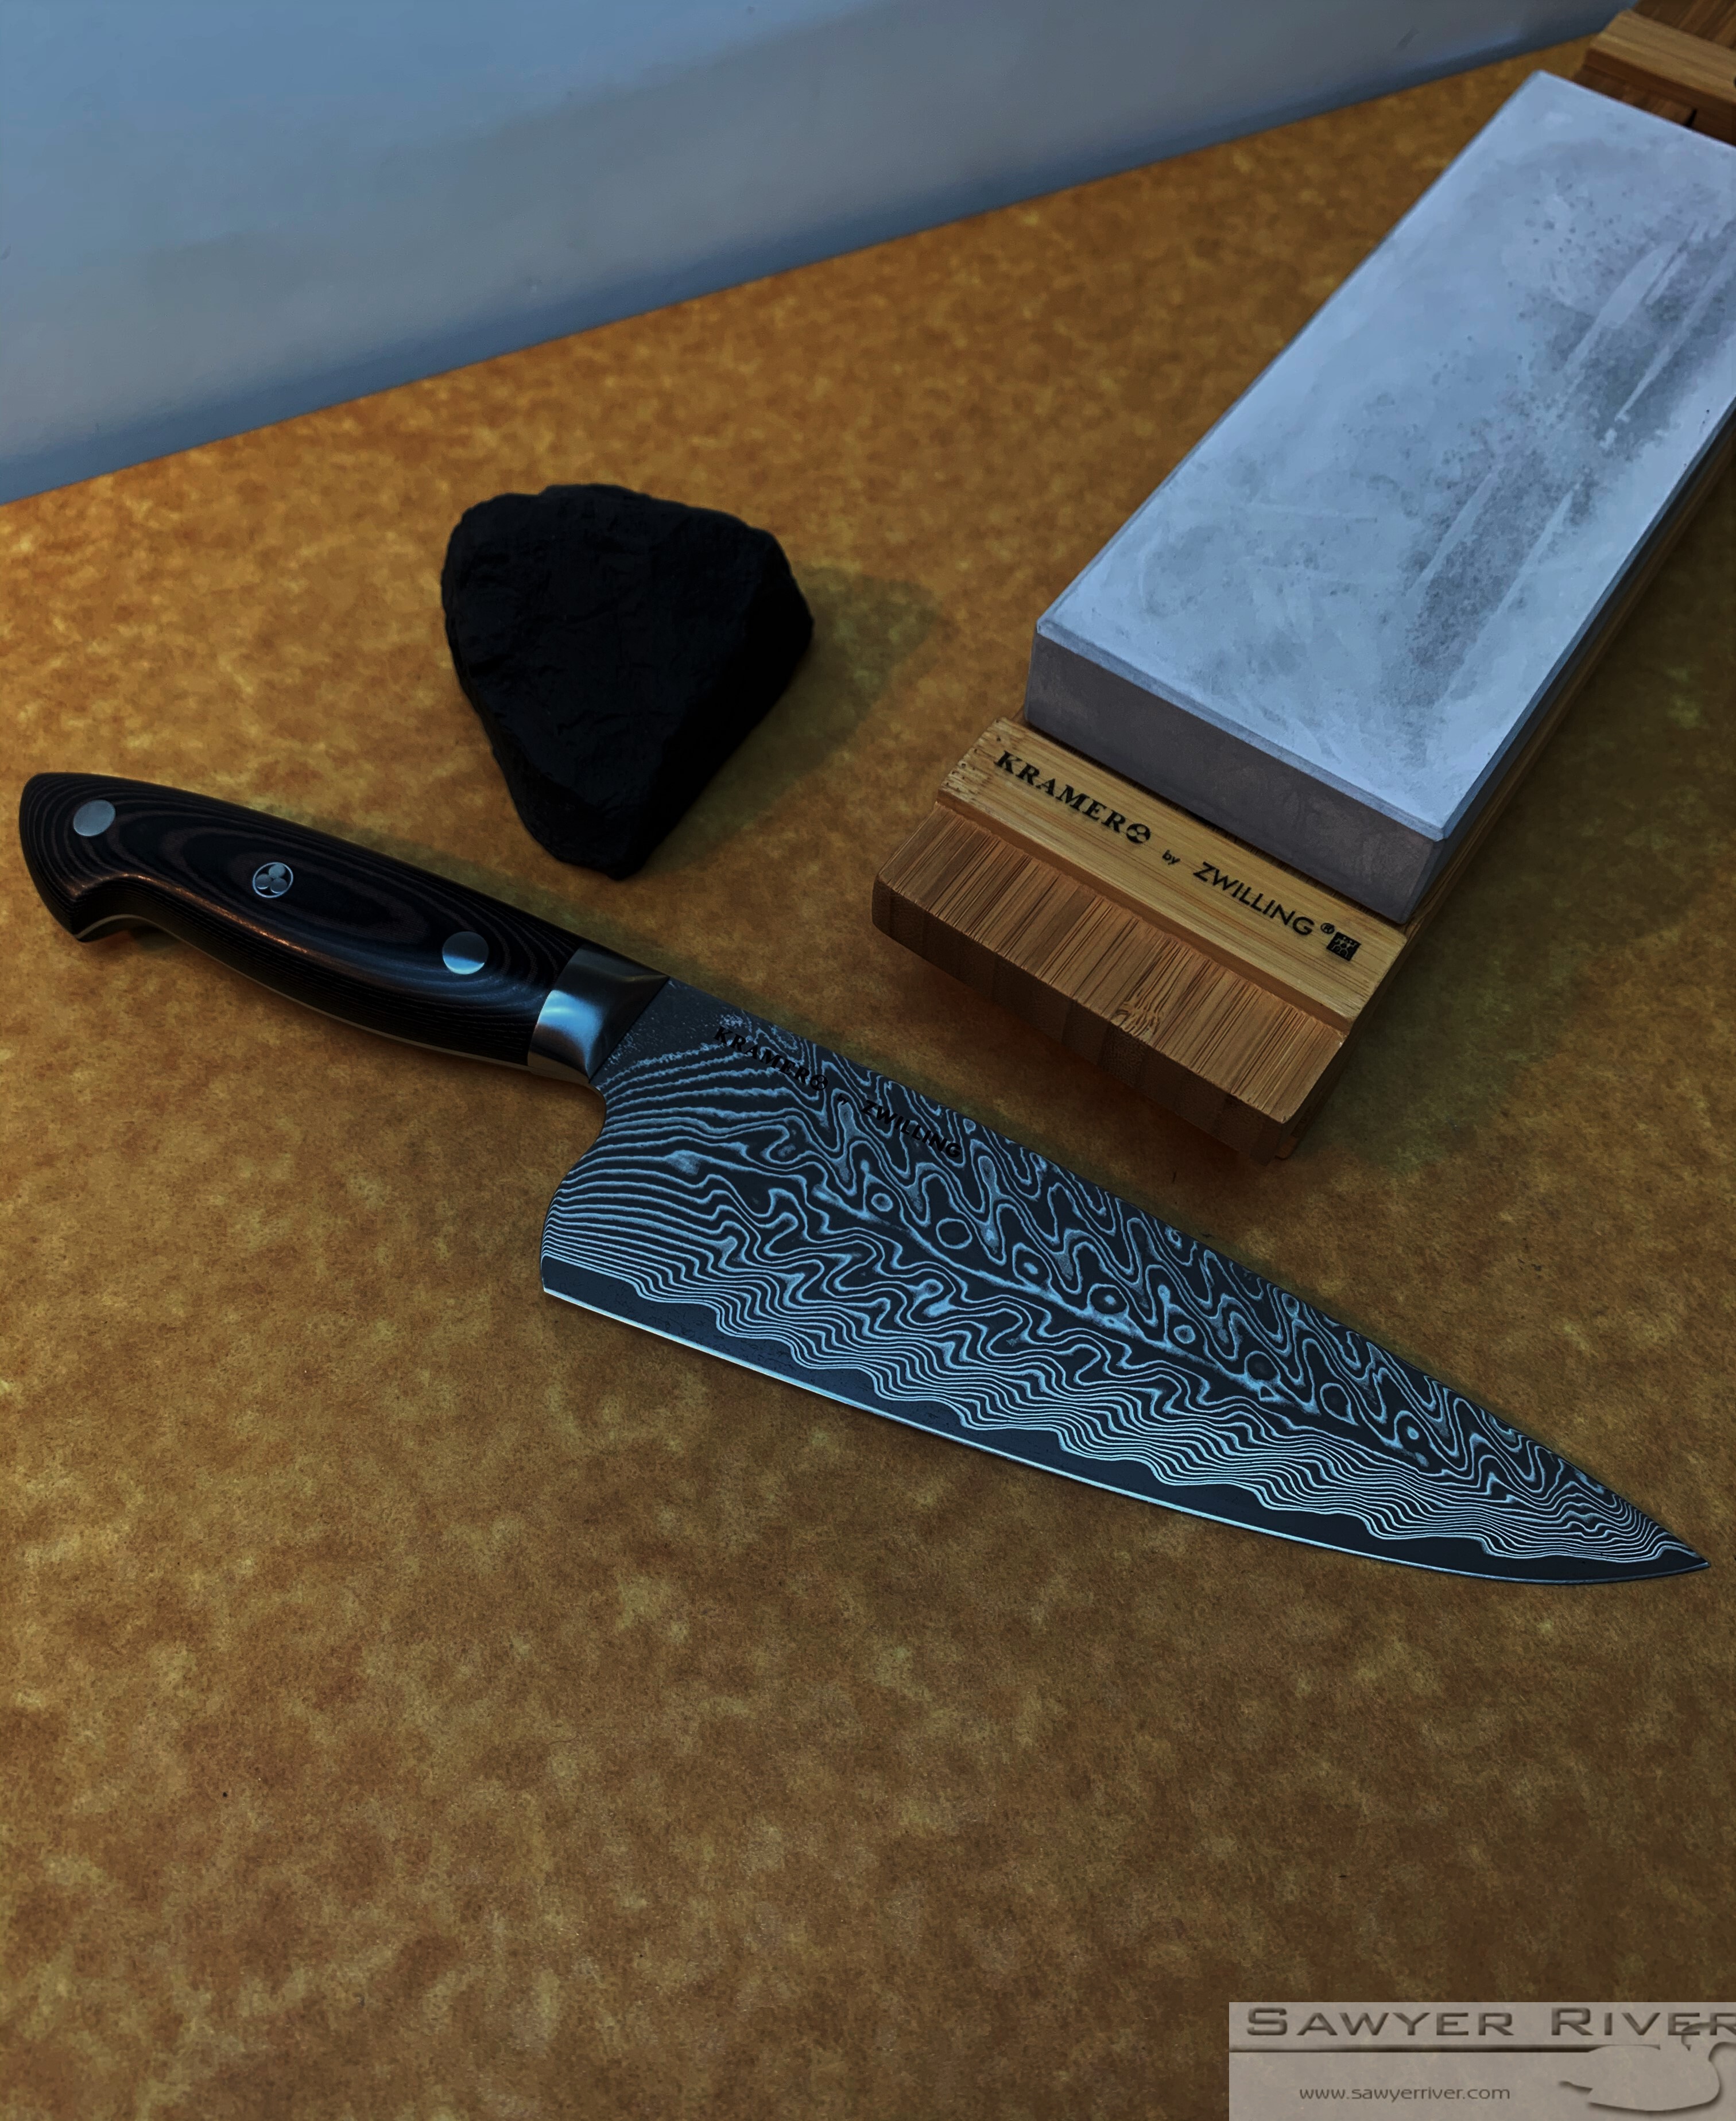 Stainless Damascus 8 Chef's Knife by Zwilling J.A. Henckels - Kramer Knives